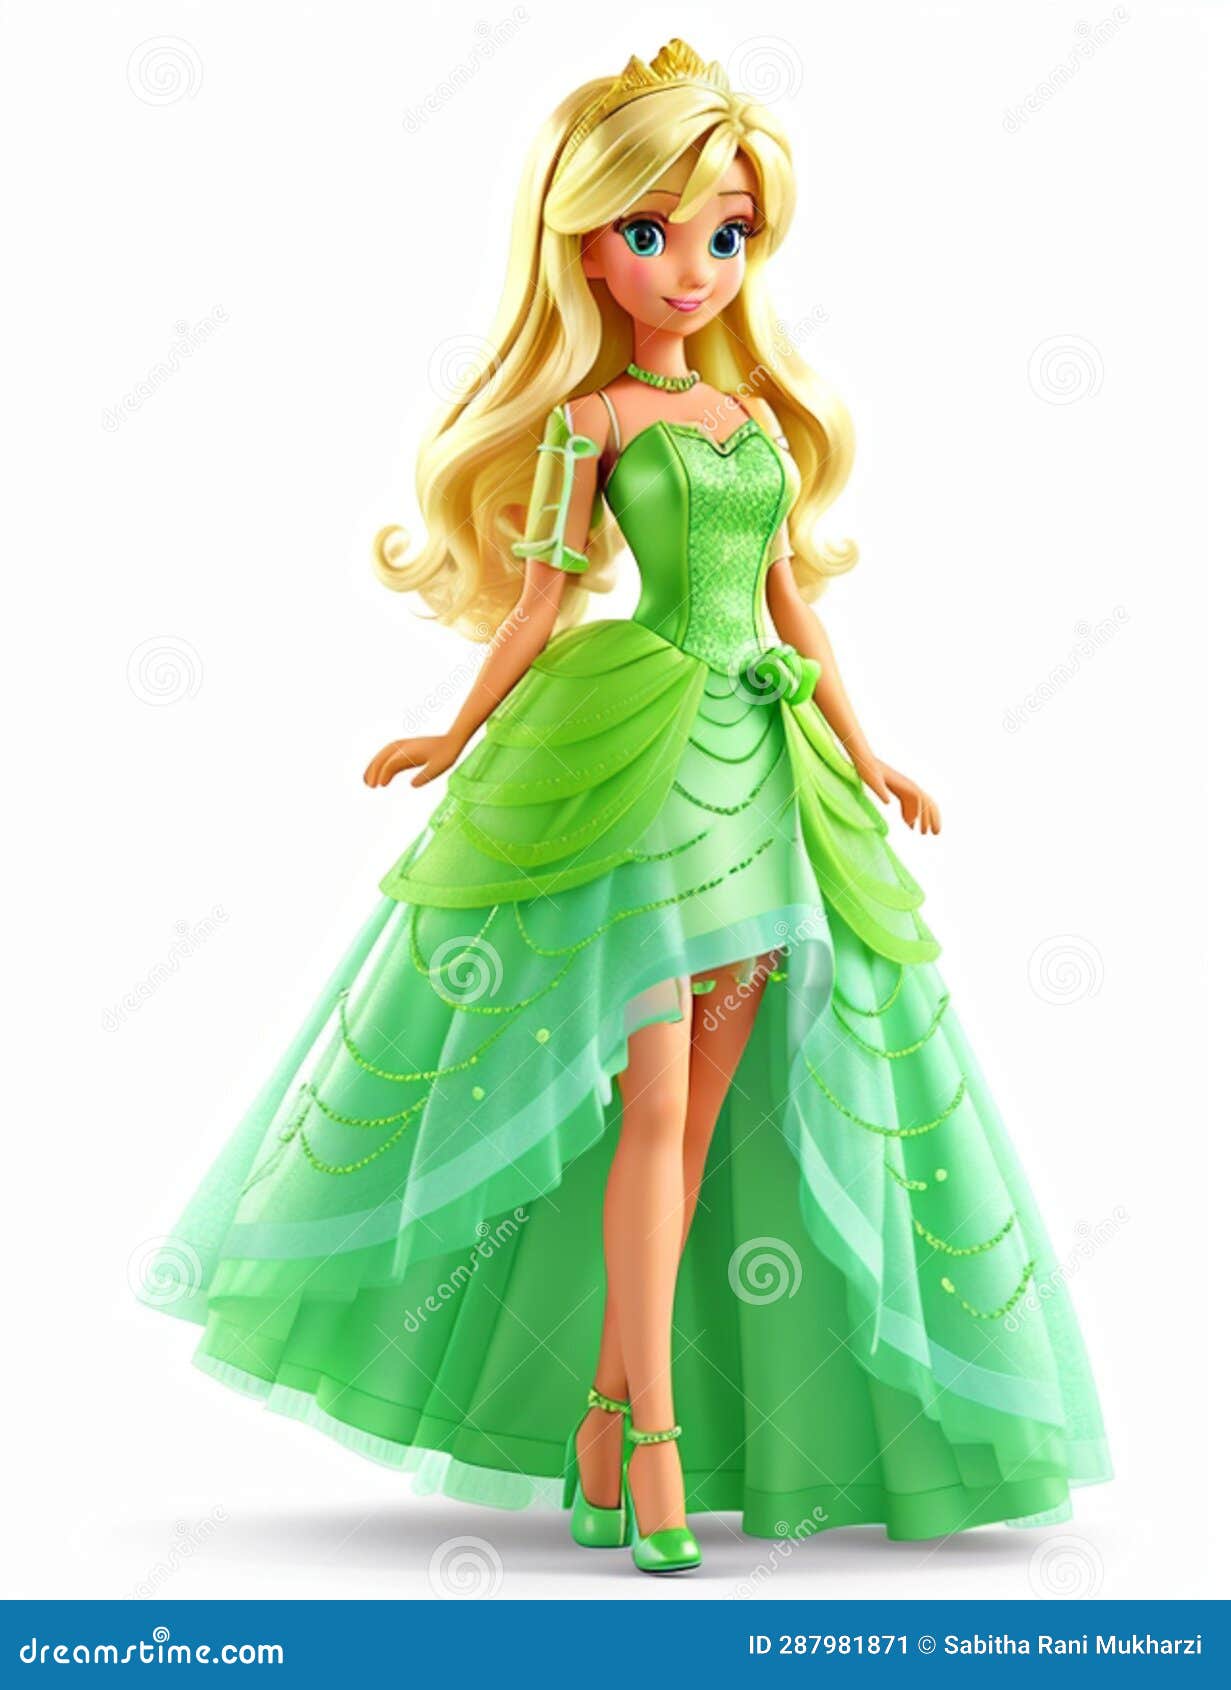 Buy Green Outfit for Barbie, Top, Pants and Handbag for Barbie Doll,  Handmade. Online in India - Etsy